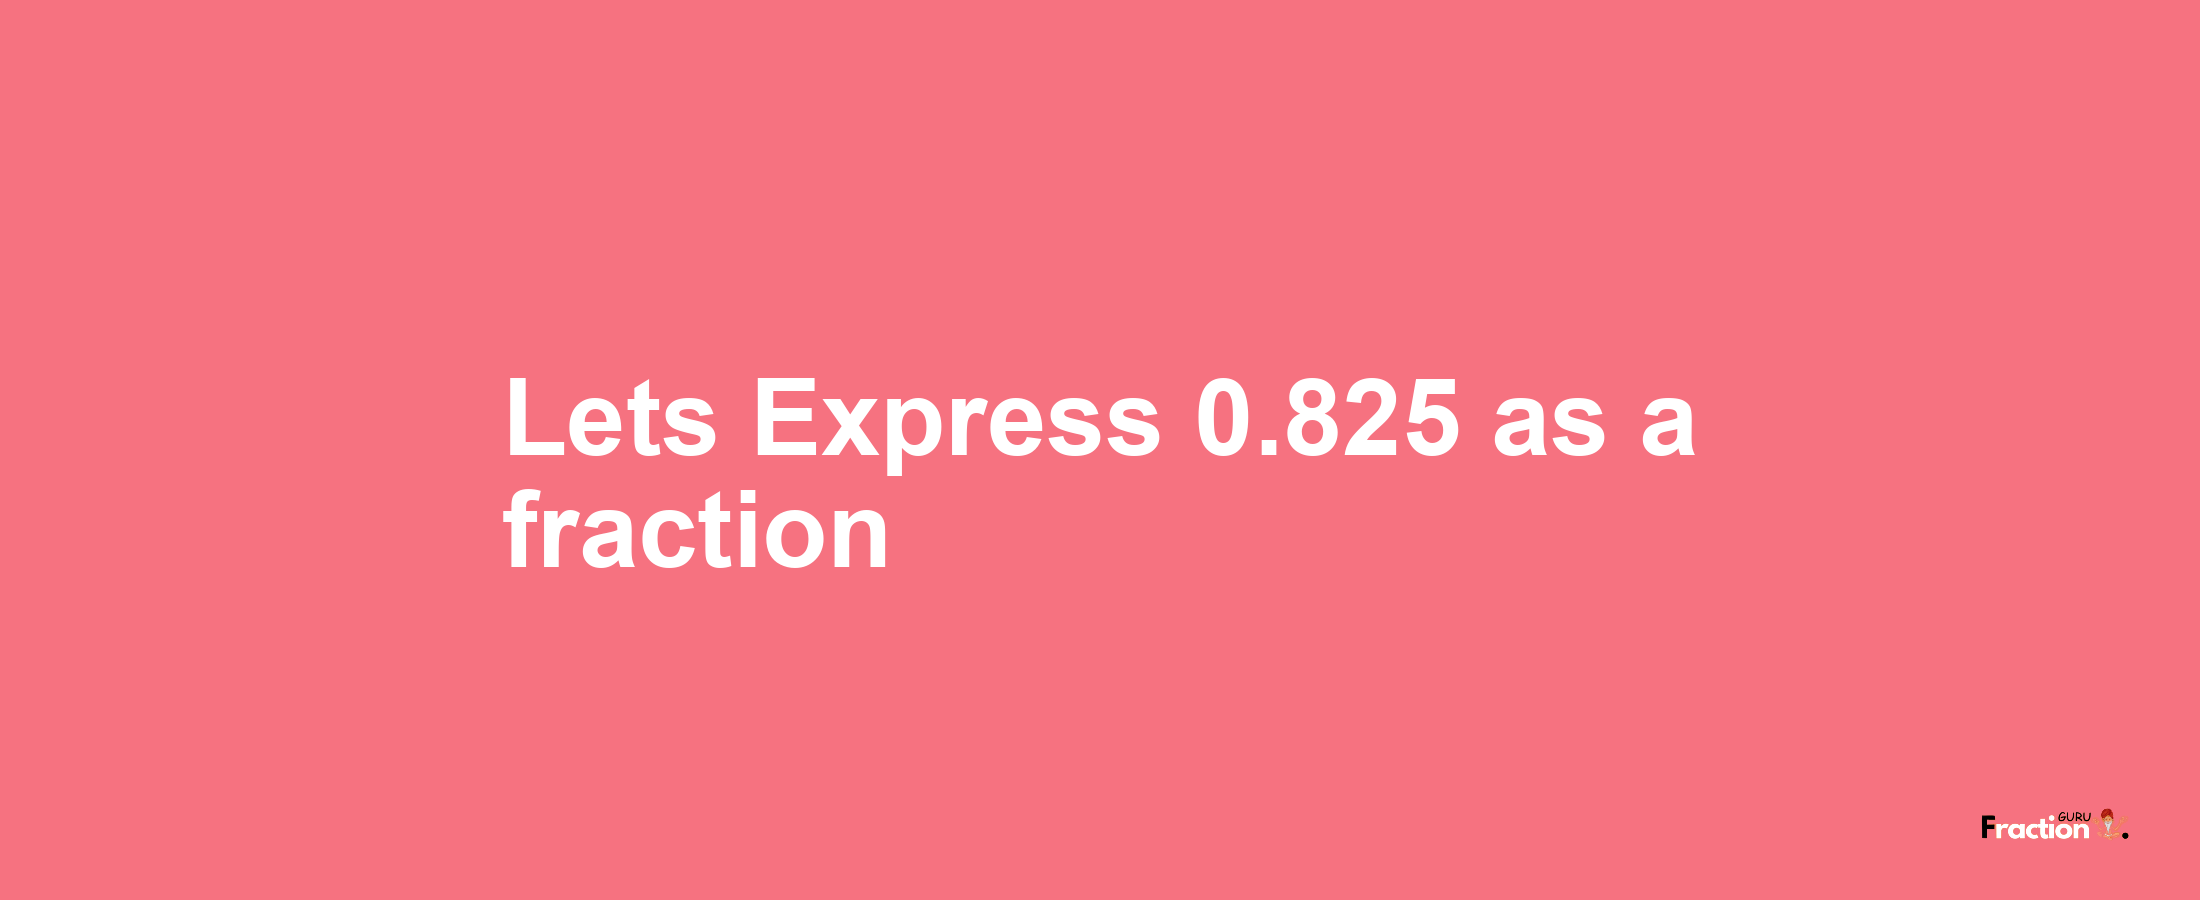 Lets Express 0.825 as afraction